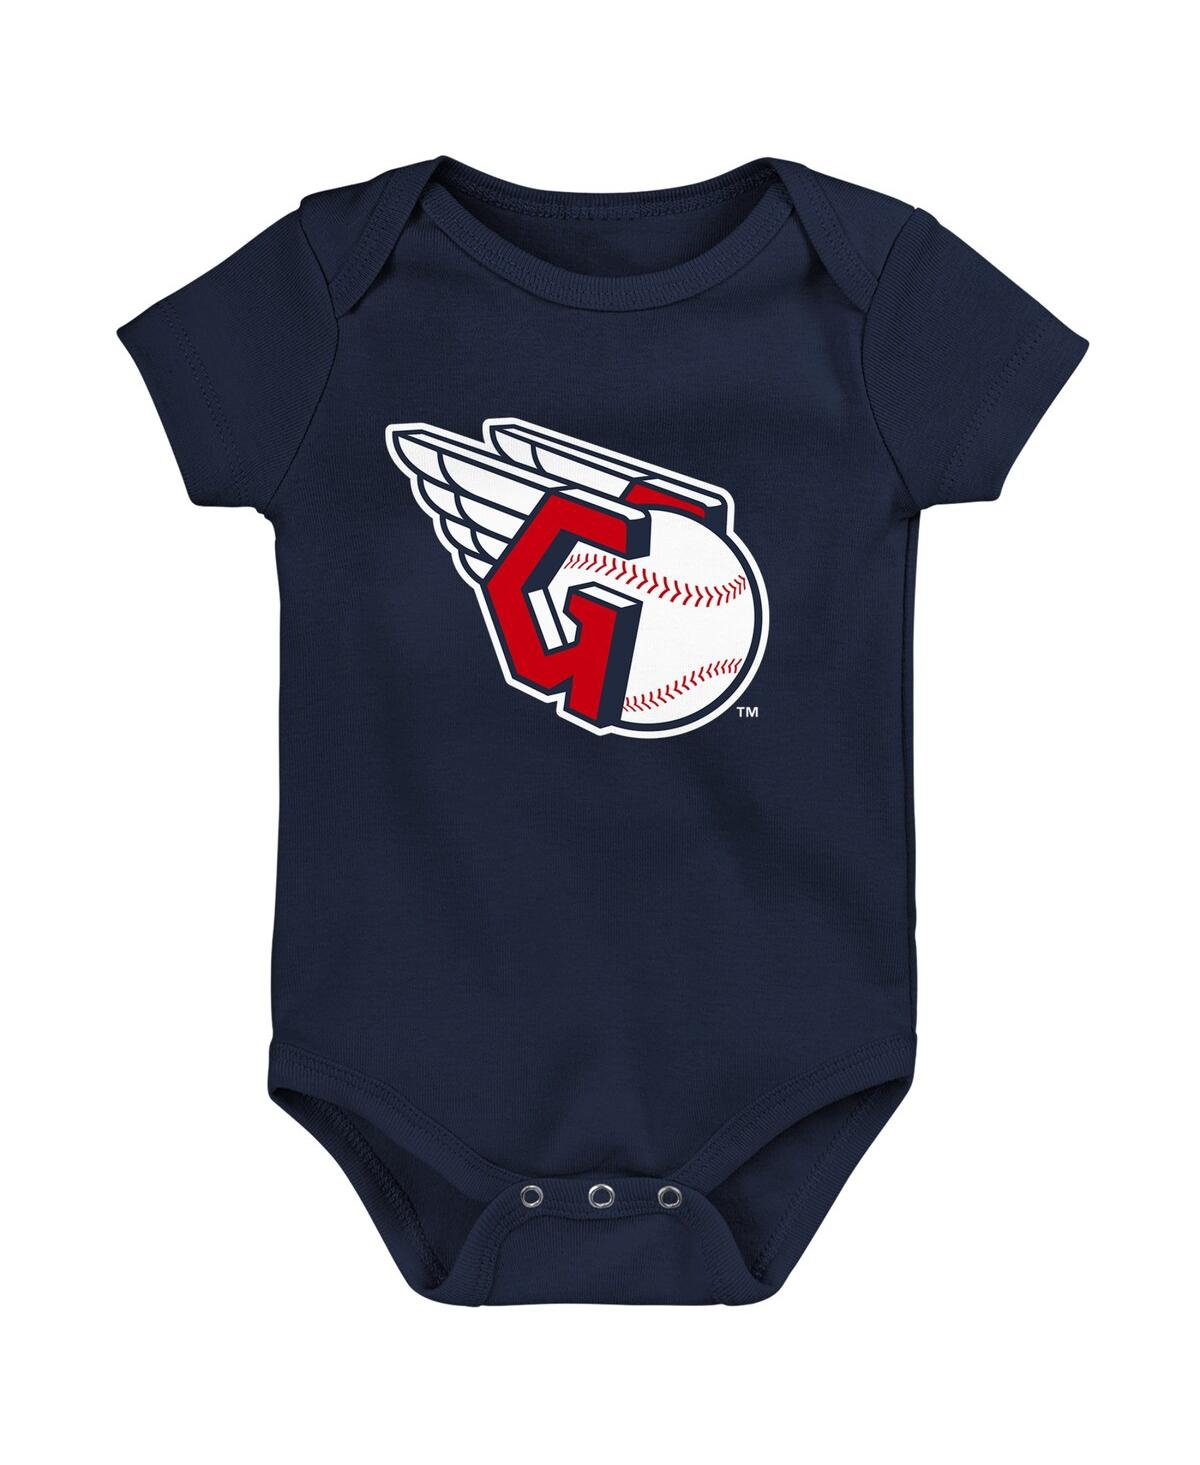 Outerstuff Babies' Newborn And Infant Boys And Girls Navy Cleveland Guardians Primary Team Logo Bodysuit